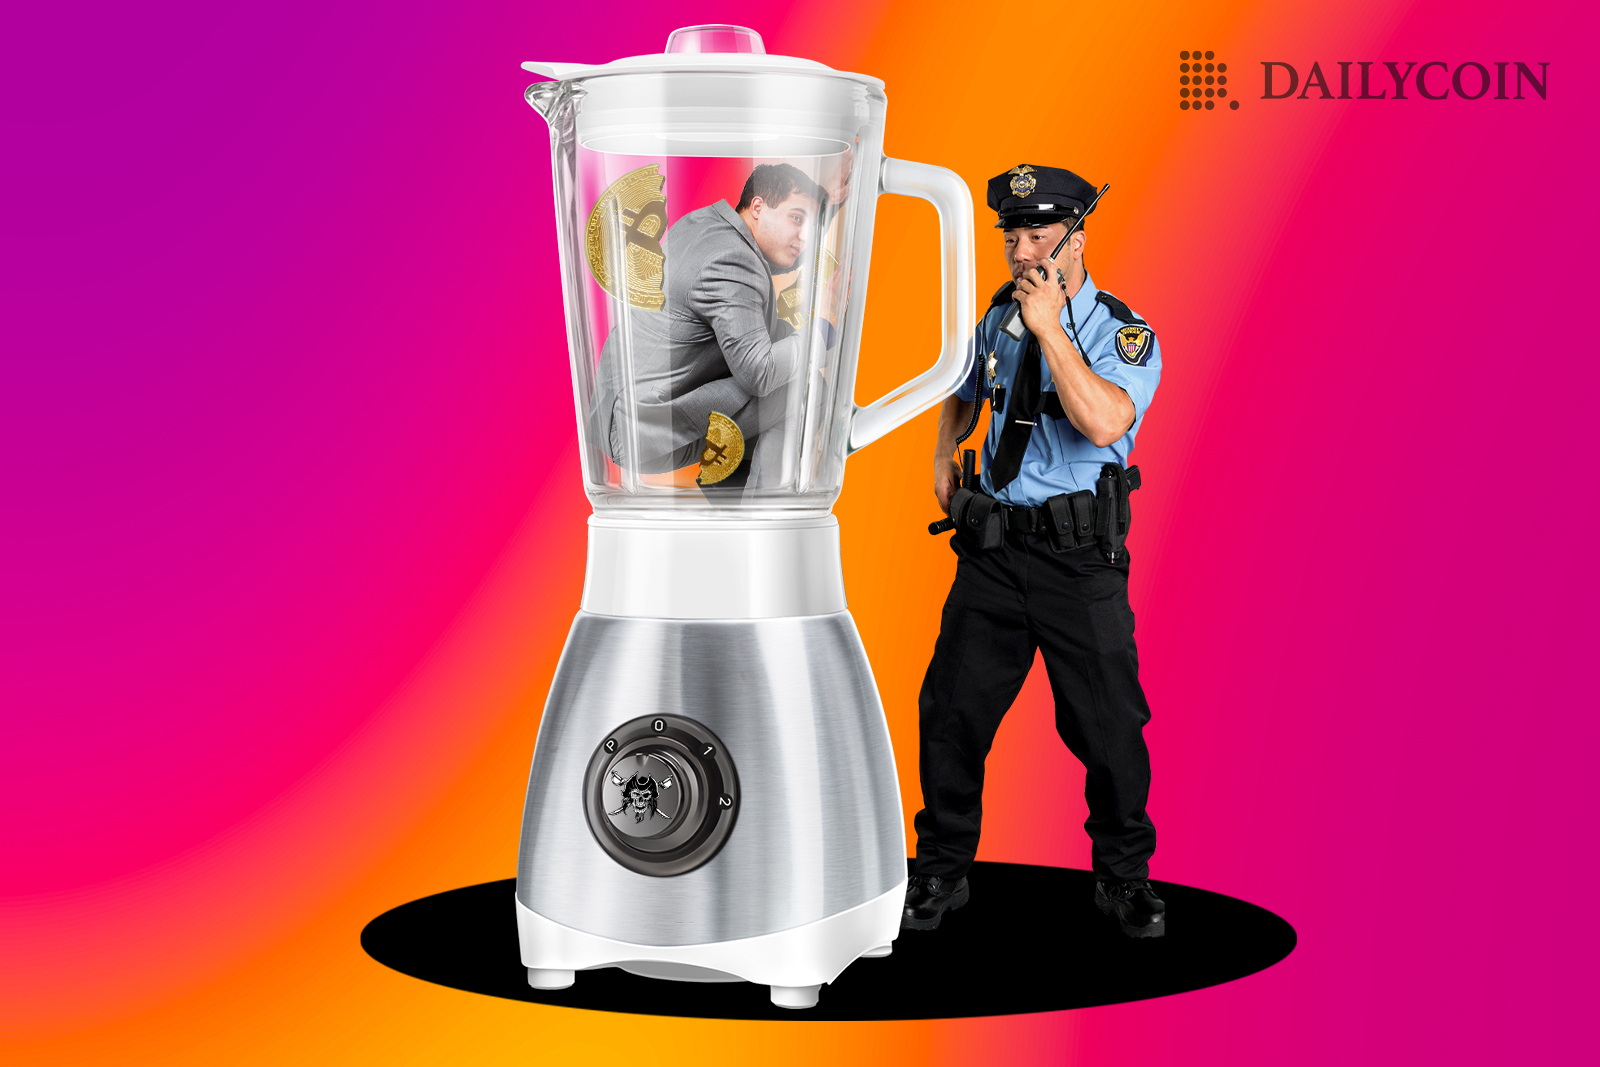 Police officer holding a person hostage in a blender